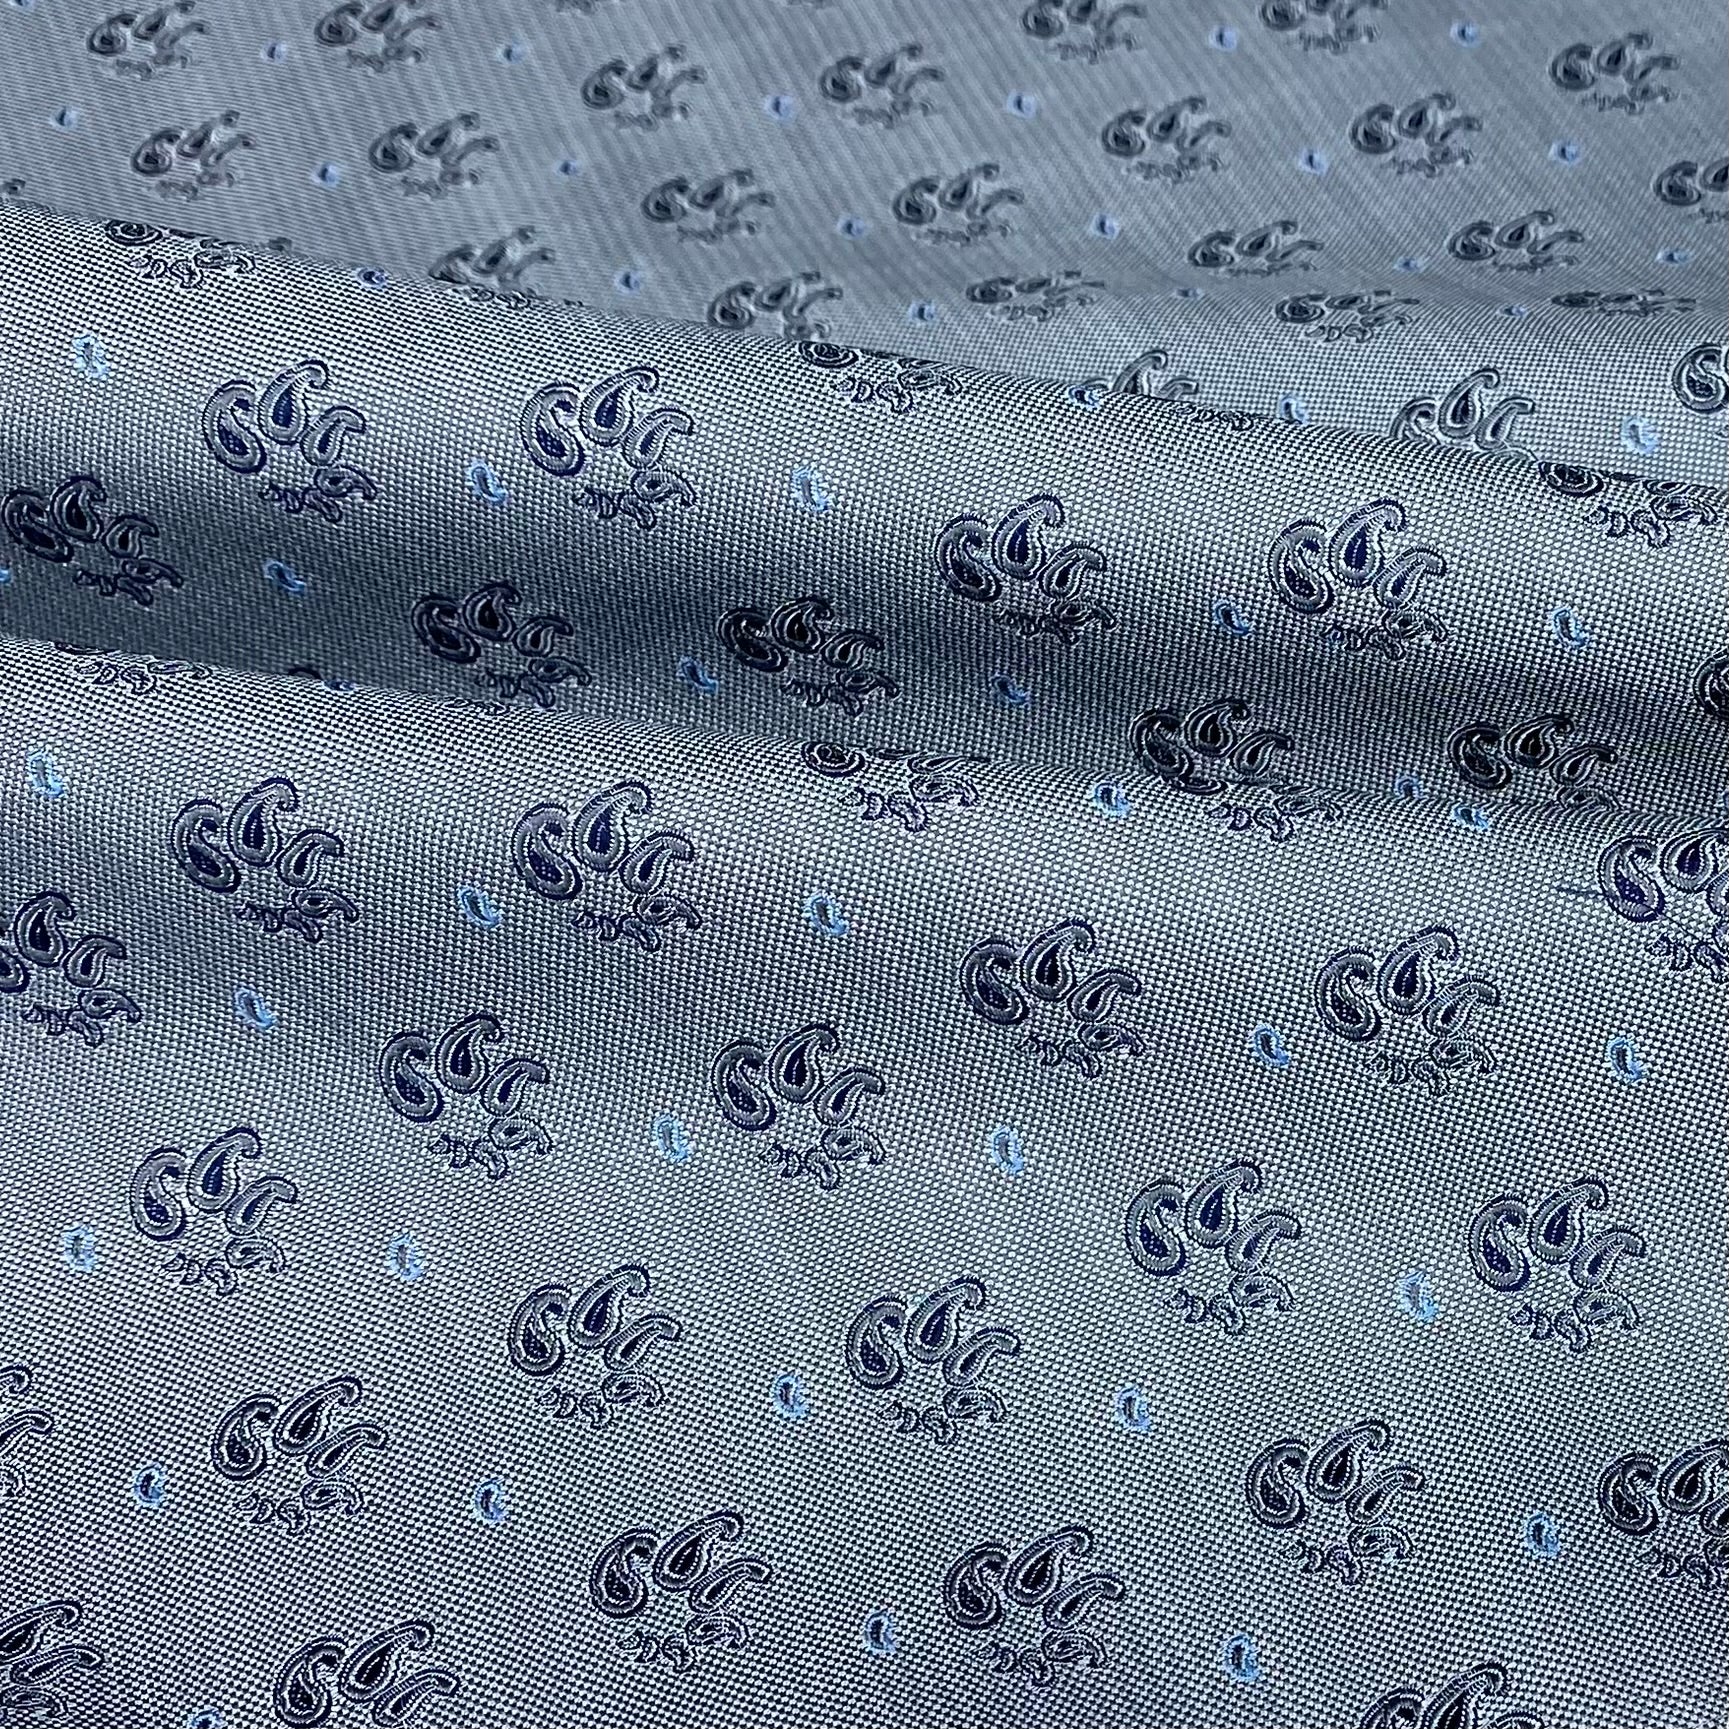 Paisley Polyester Jacquard - Grey / White / Blue - Remnant